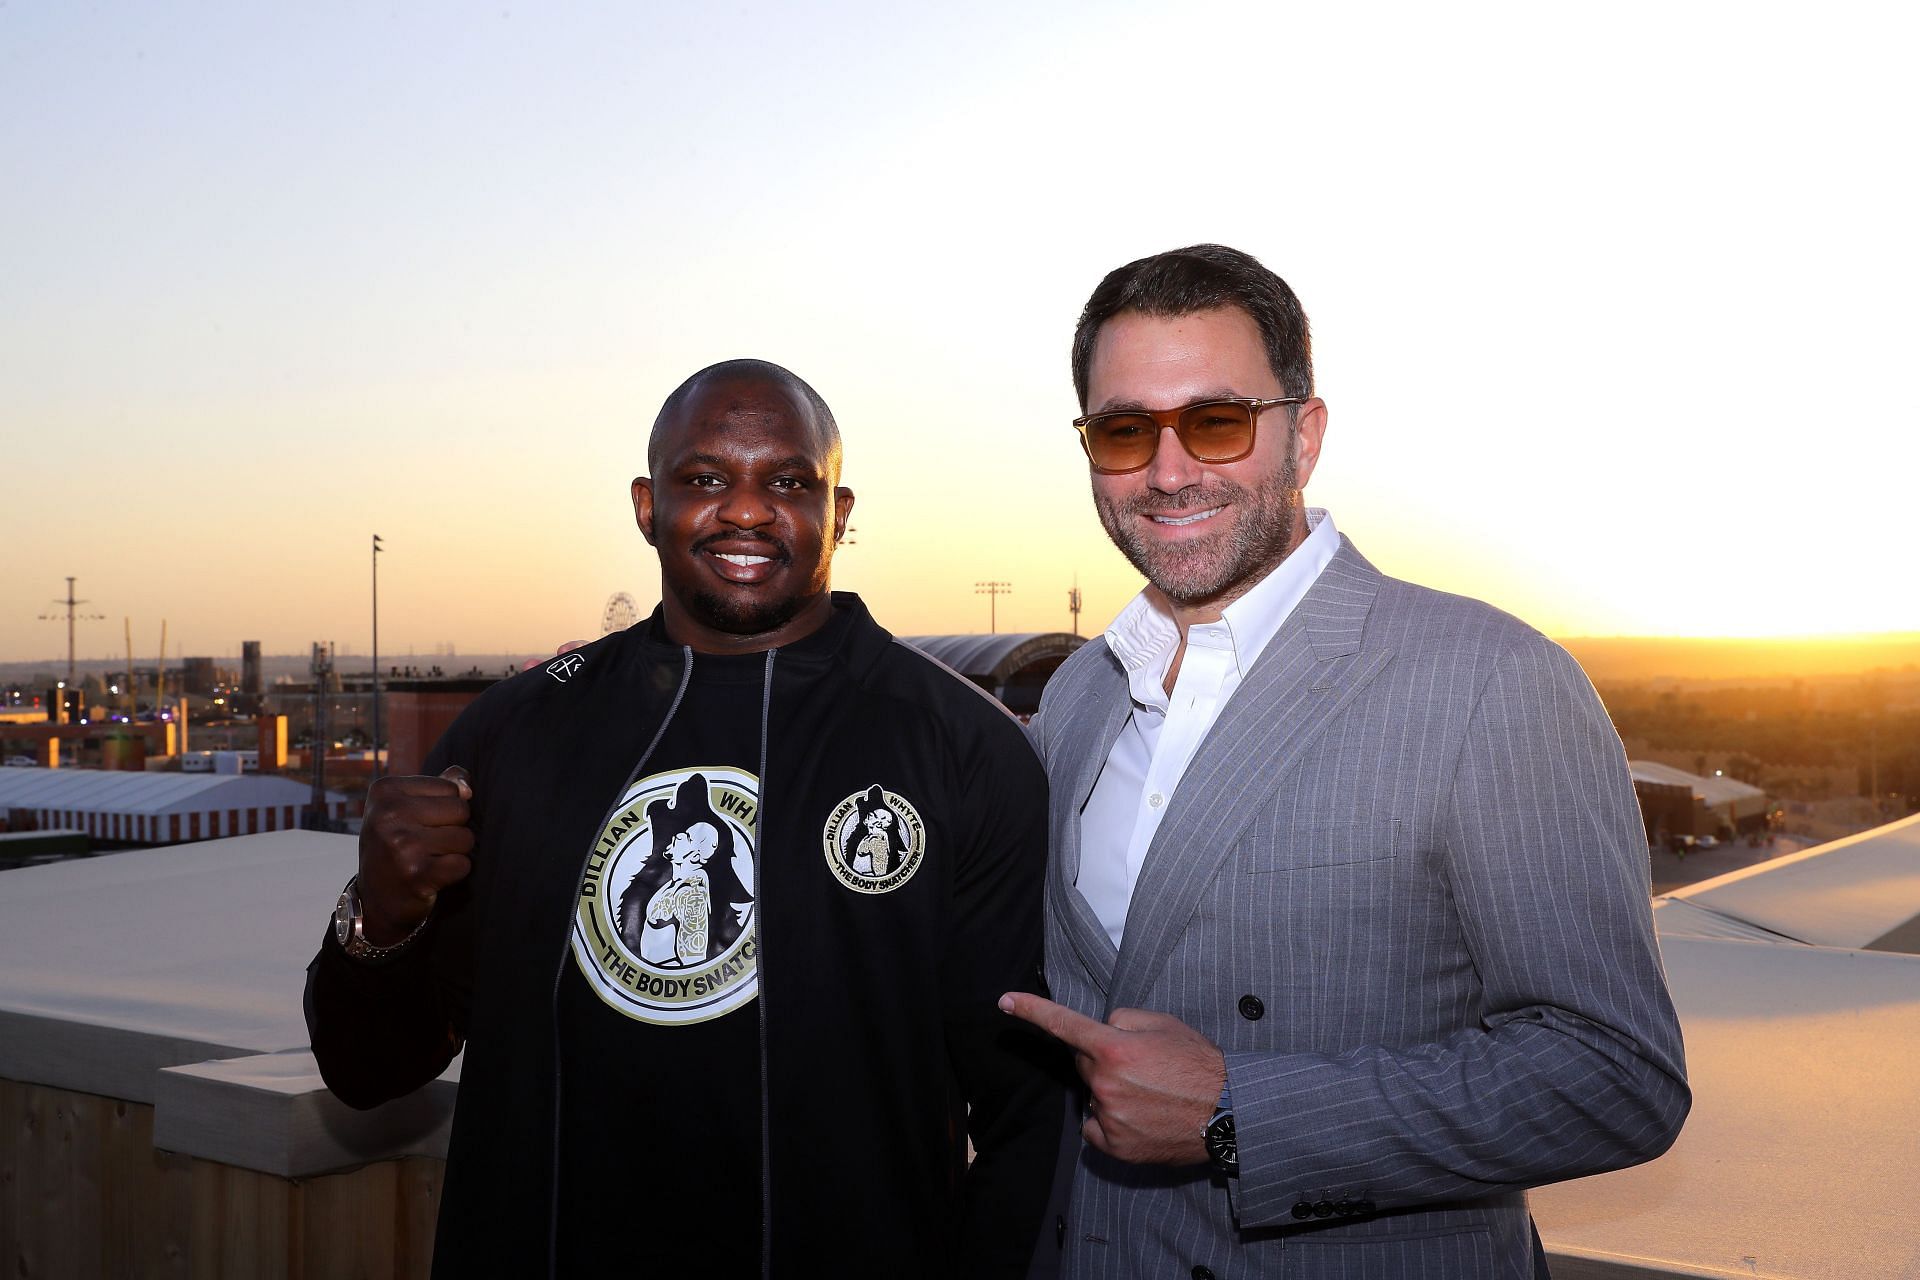 Dillian Whyte (left) and Eddie Hearn (right) - Image via Getty Images